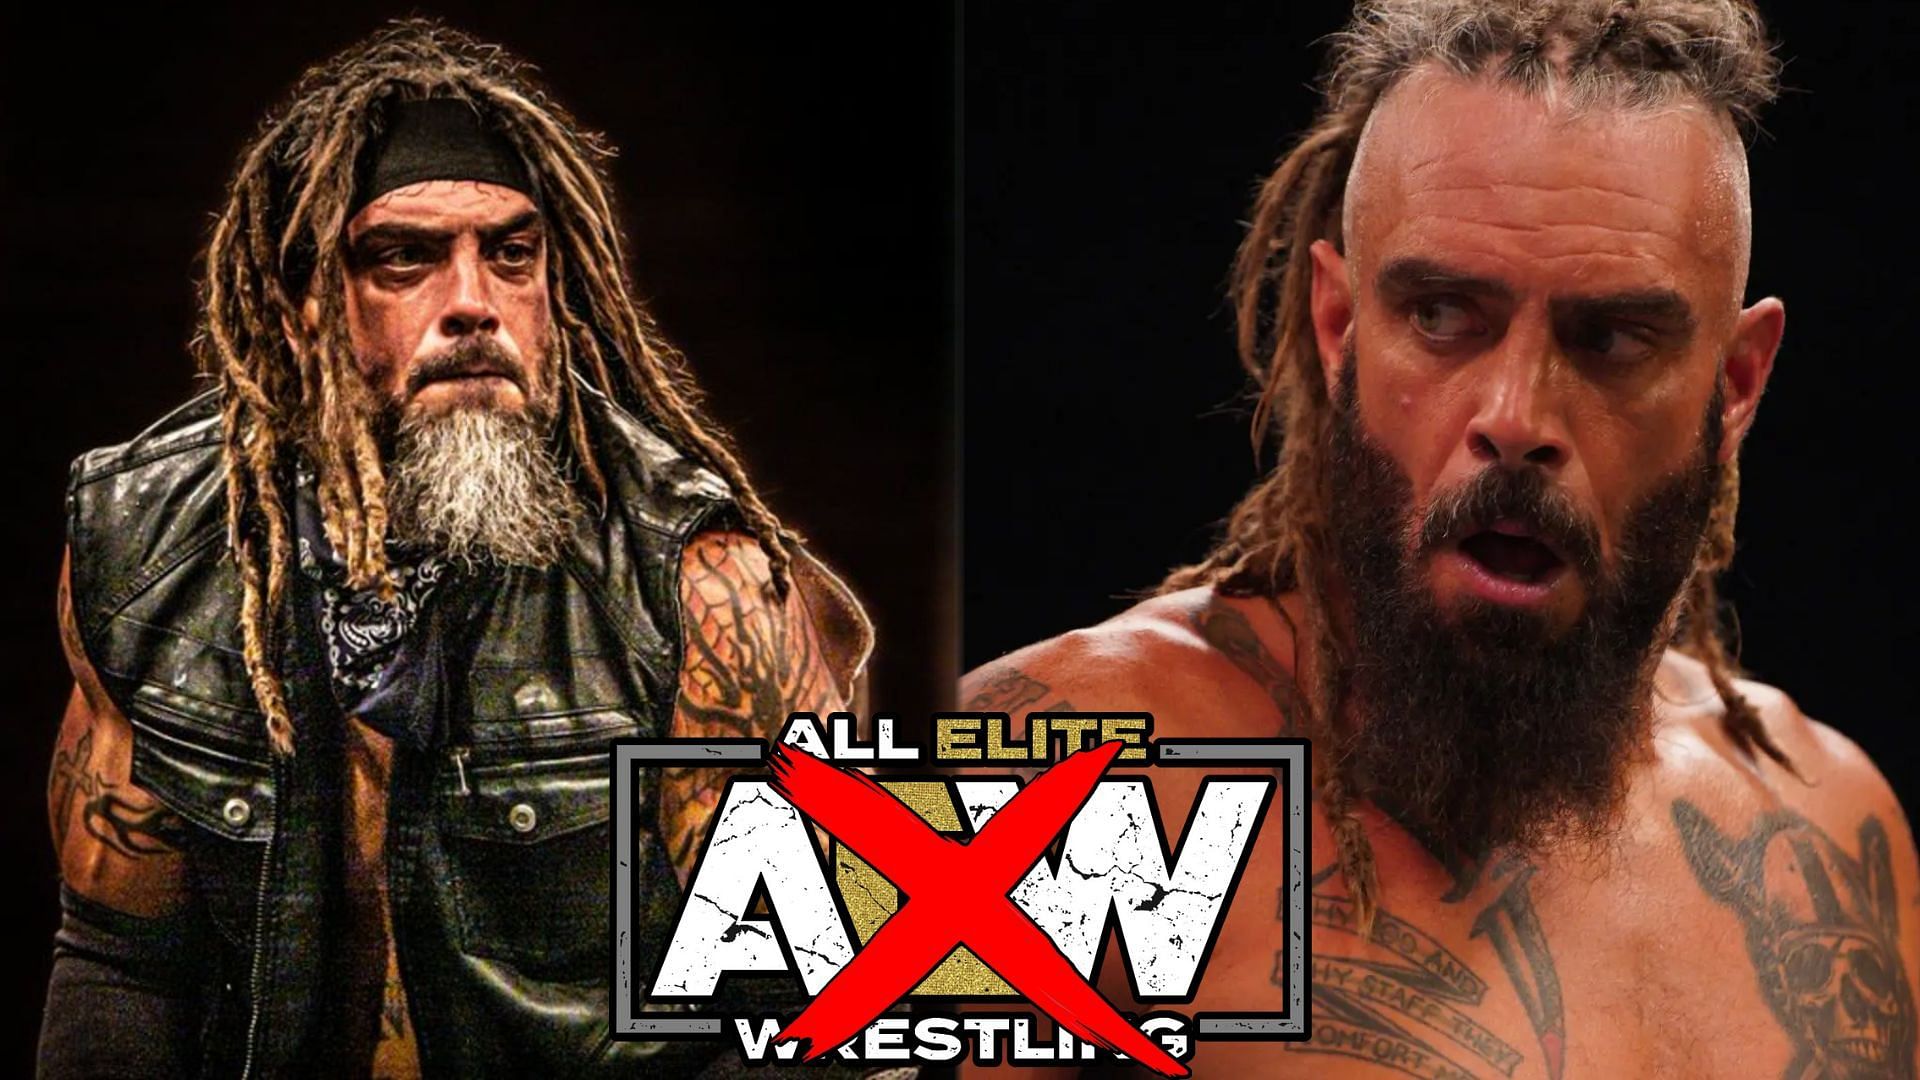 Jay Briscoe never appeared on AEW like other ROH stars have over the past year.